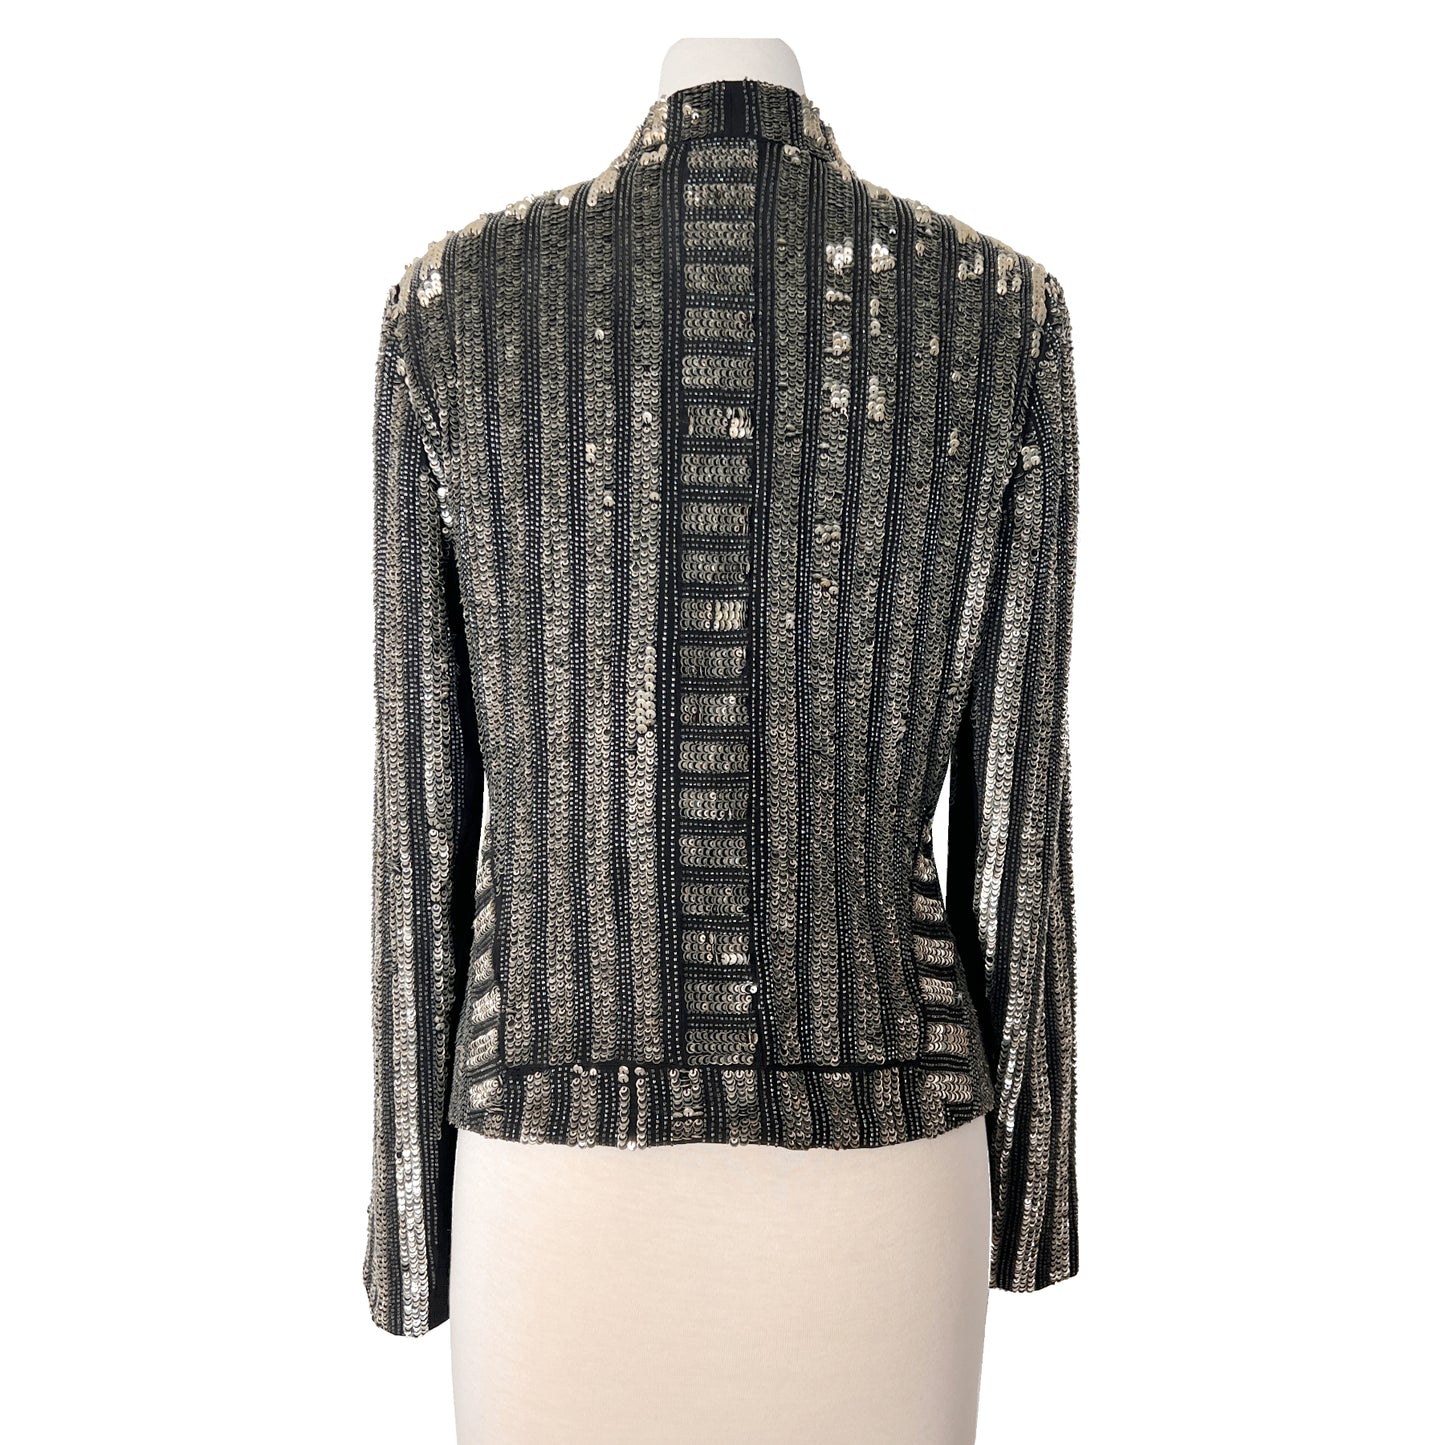 J. Mendel Paris Couture Silver Sequin Cropped Embroidered Jacket Blazer